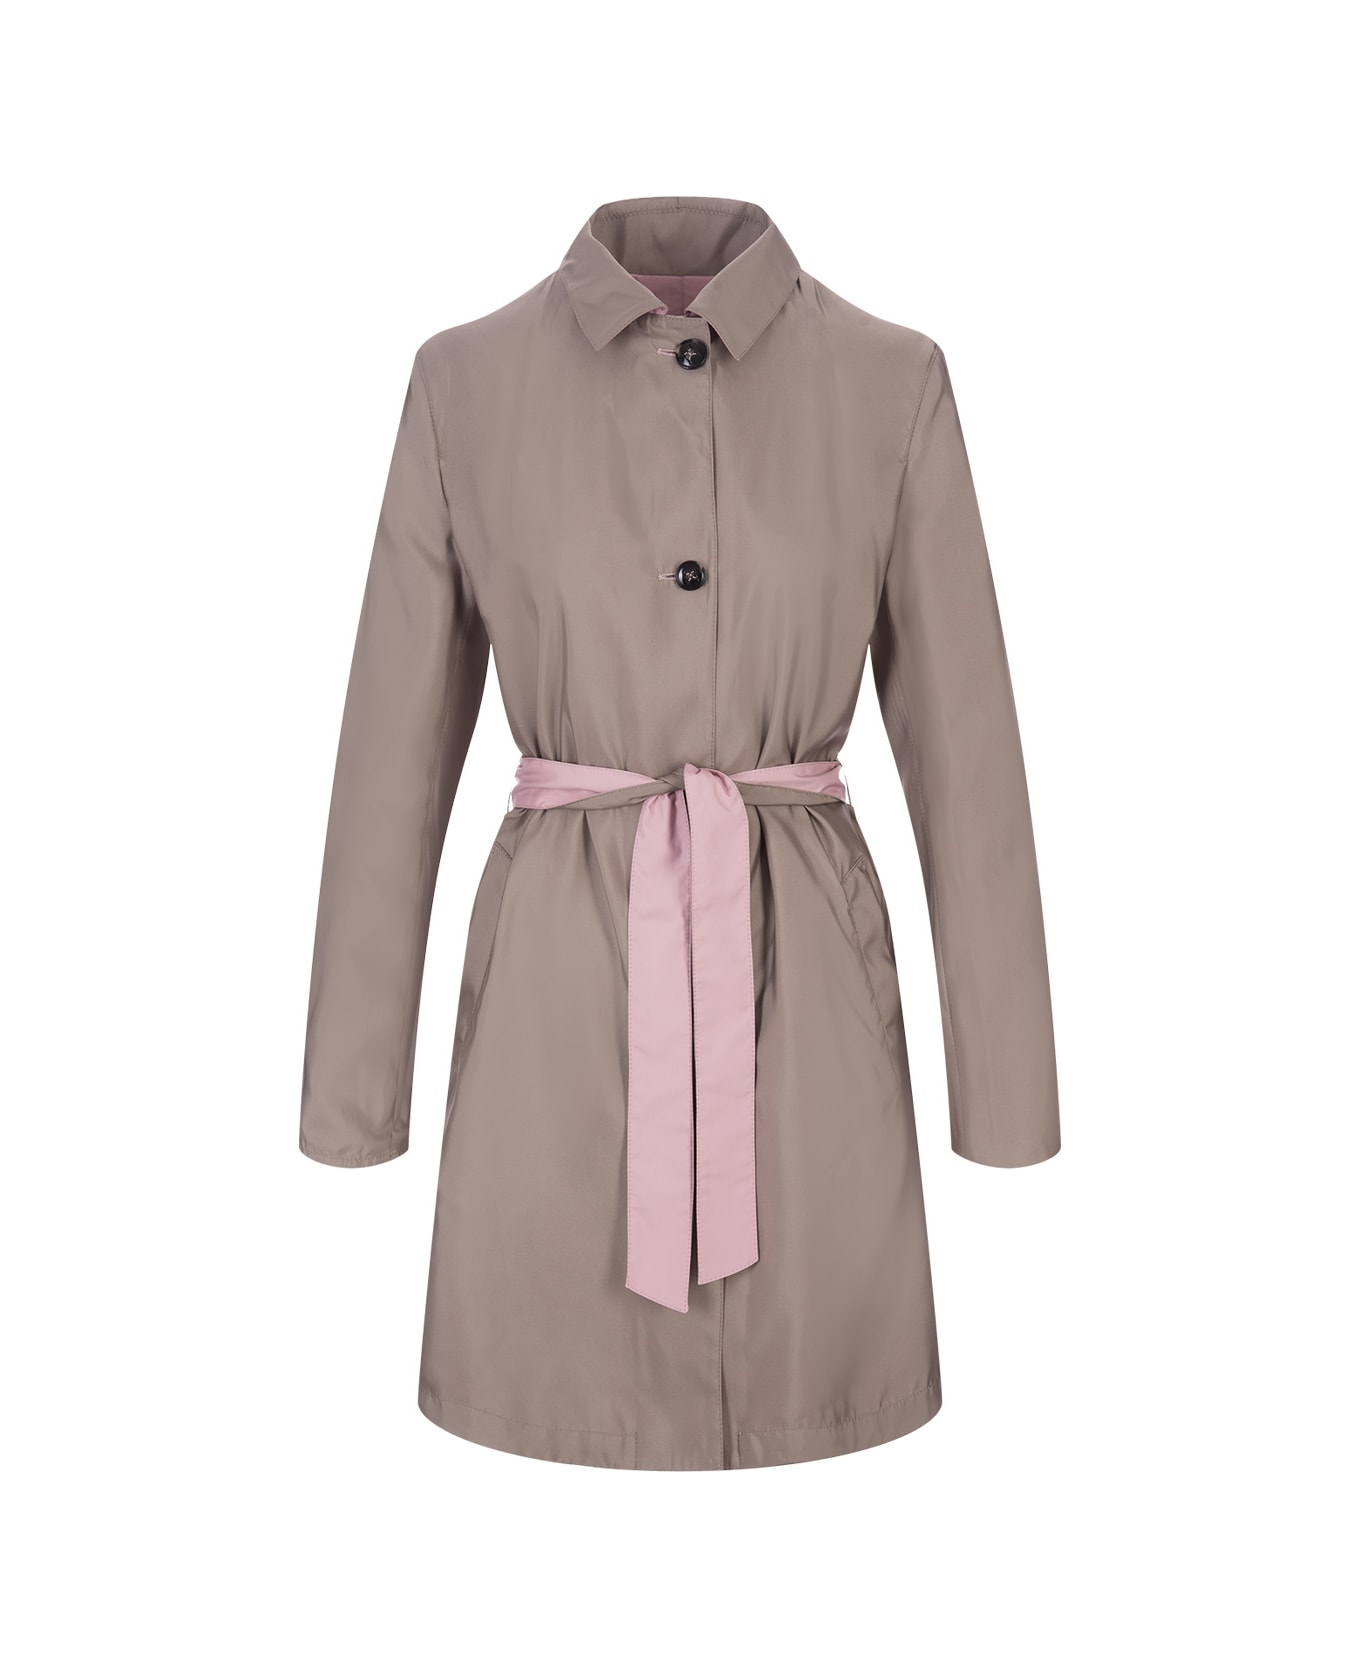 Kiton Pink And Sand Reversible Trench Coat - Pink コート